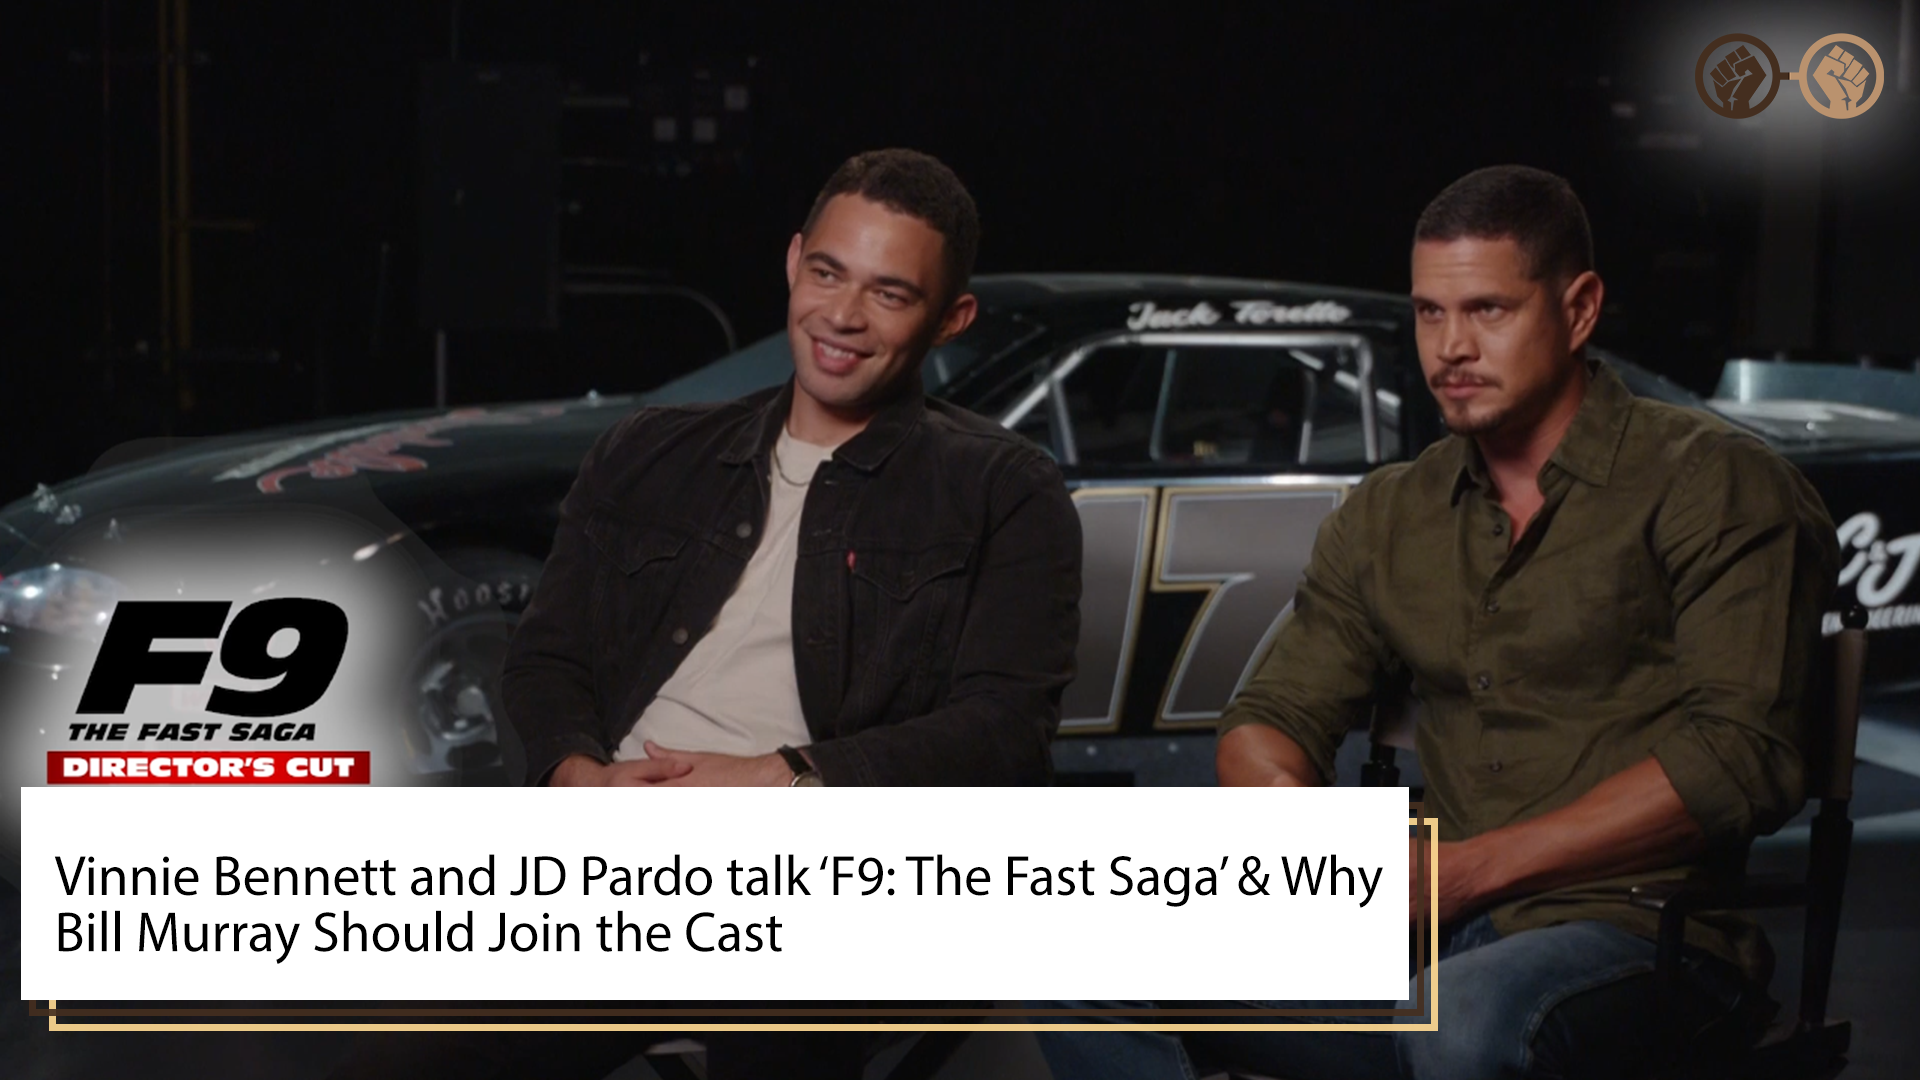 Vinnie Bennett & JD Pardo Talk ‘F9: The Fast Saga’ And Why Bill Murray Should Join The Cast